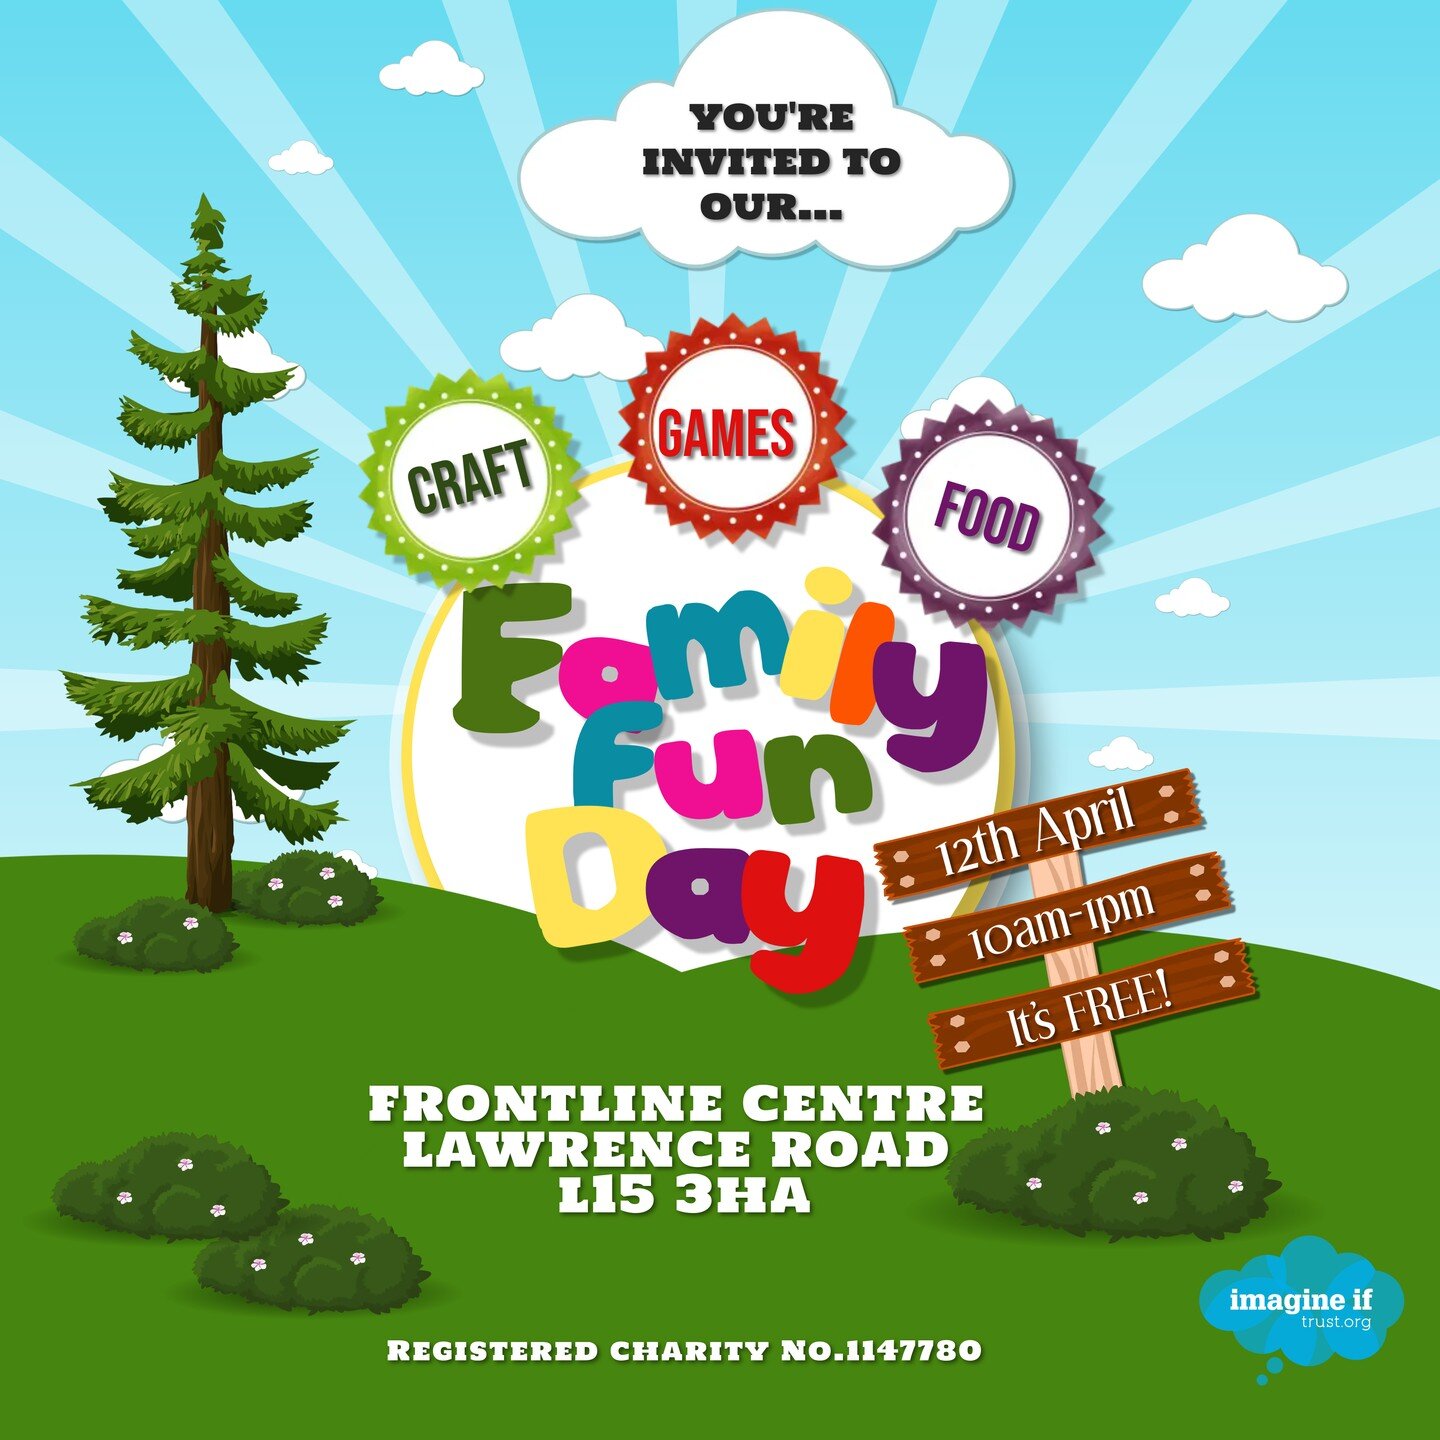 Come and join us next week for our free Family Fun Day. We'll have bouncy castles, craft, games and a free bowl of scouse for every child. Suitable for kids aged 3+ Doors open at 10am.